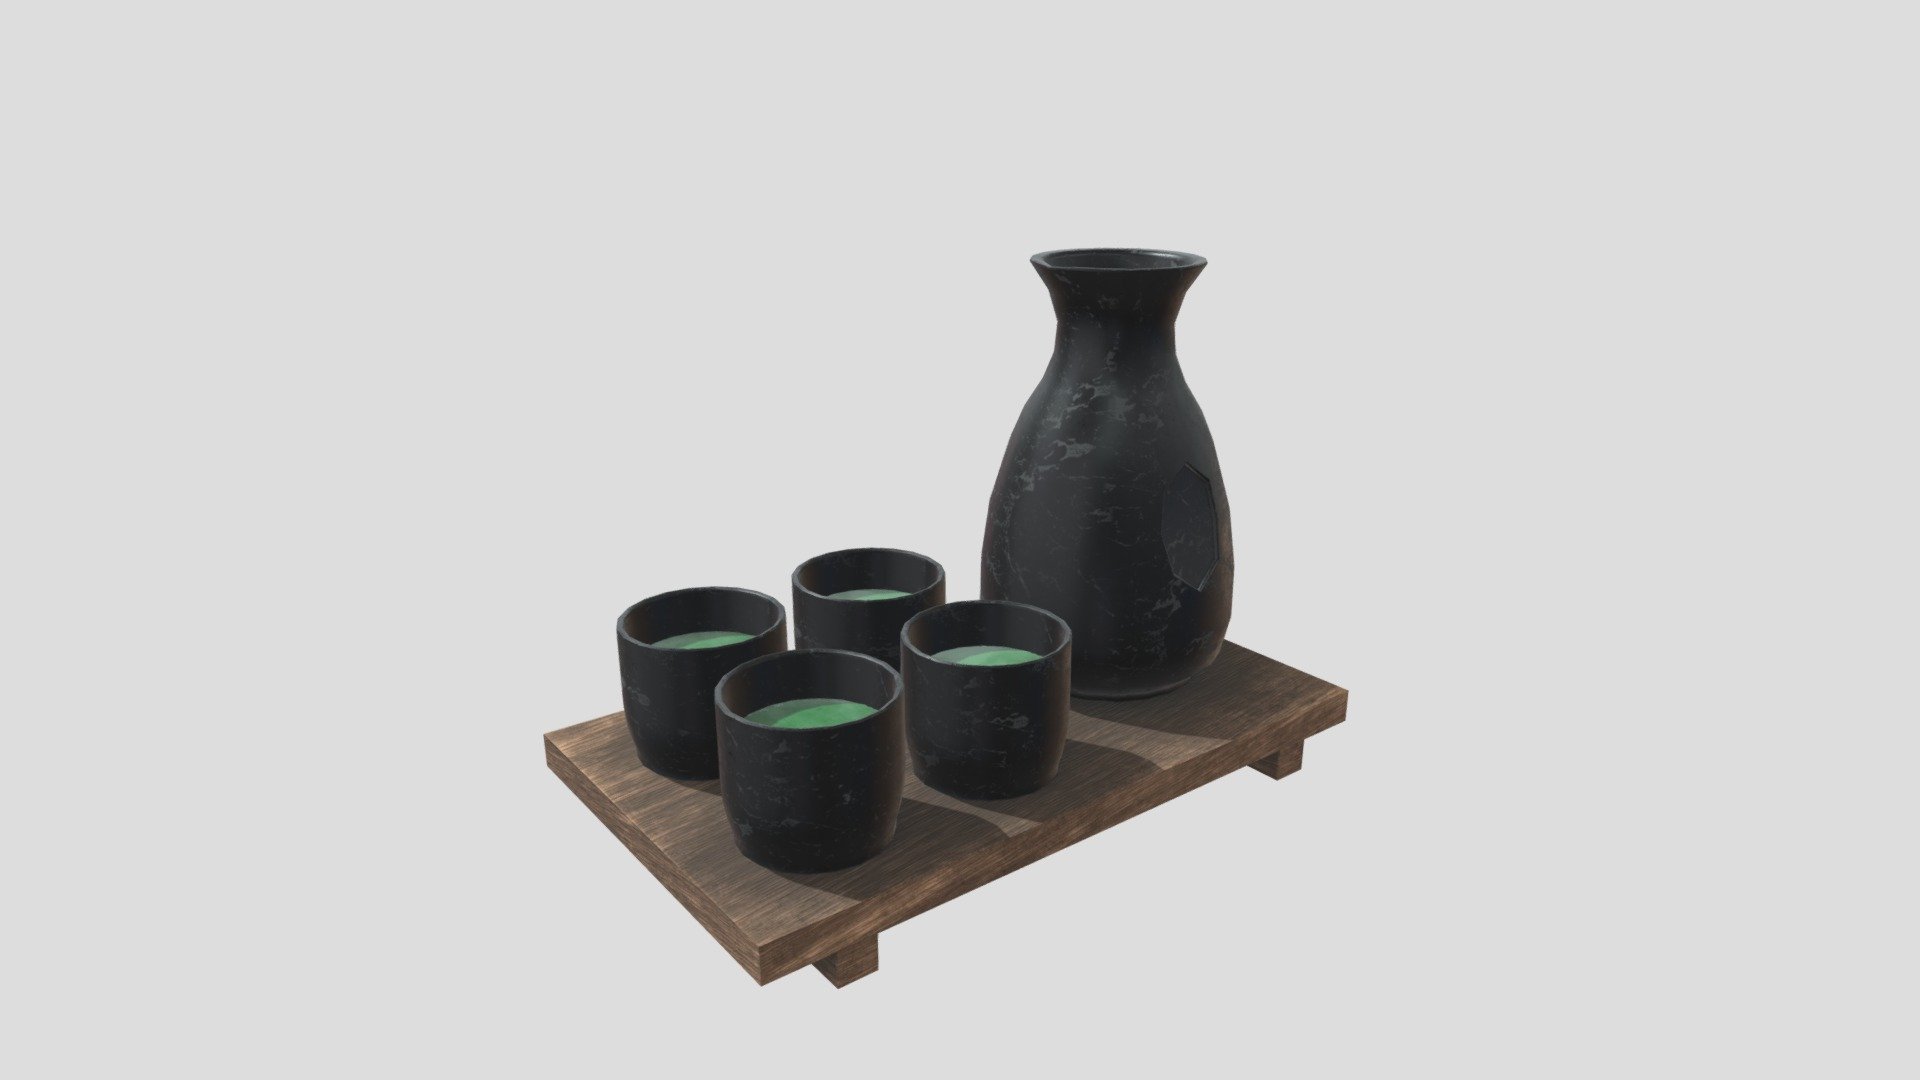 This asset is a ceramic drinking set that can be used for sake or green tea I made for my final uni assignment. 
The asset can be used in any home or restaurant kitchen; as my group used it for a ramen restaurant. 
It is the sixth asset I made for my university course in game design. 
The Tris count for this sake set is: 3648 - Ceramic Cup Set - 3D model by L. D. Canning (@l_d_canning) 3d model